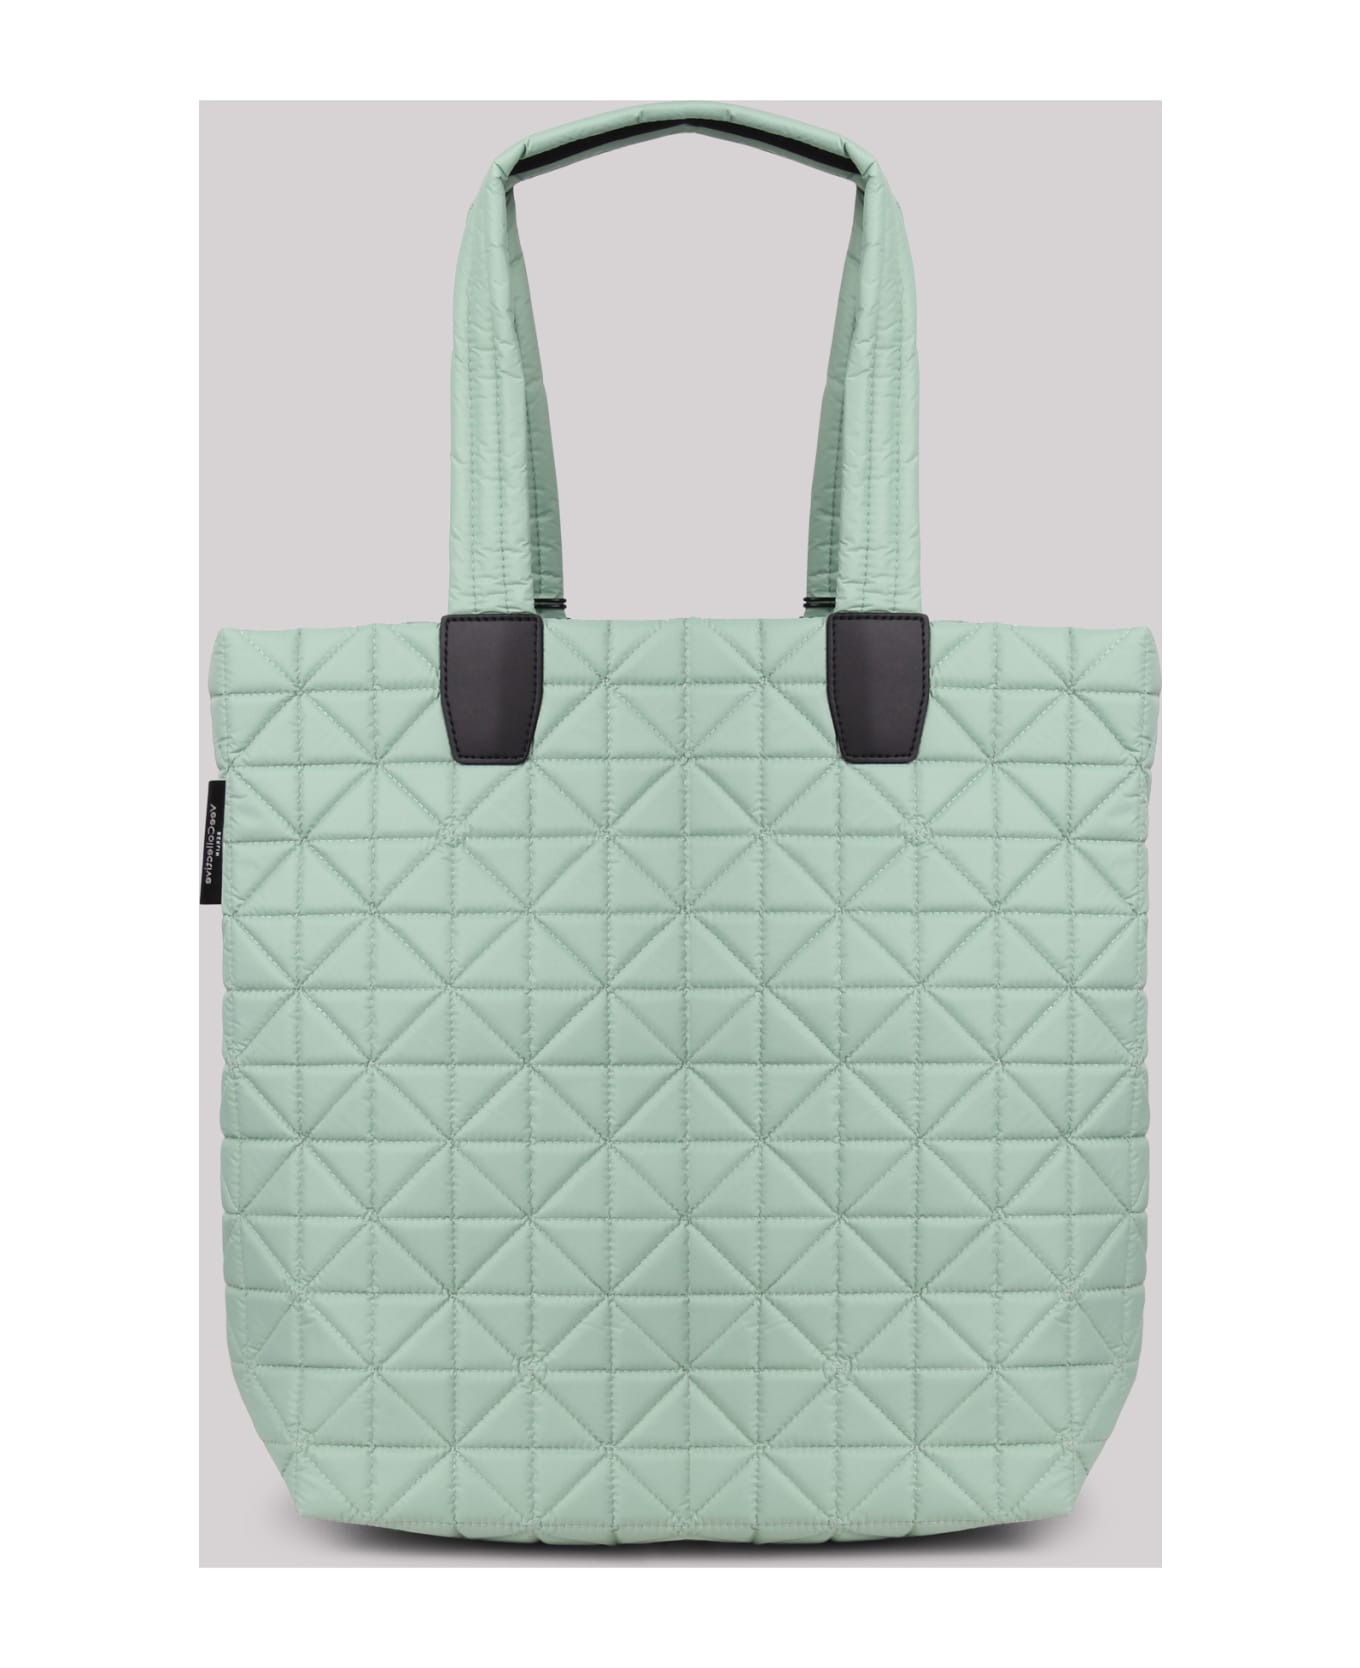 VeeCollective Vee Collective Large Vee Geometric Tote Bag